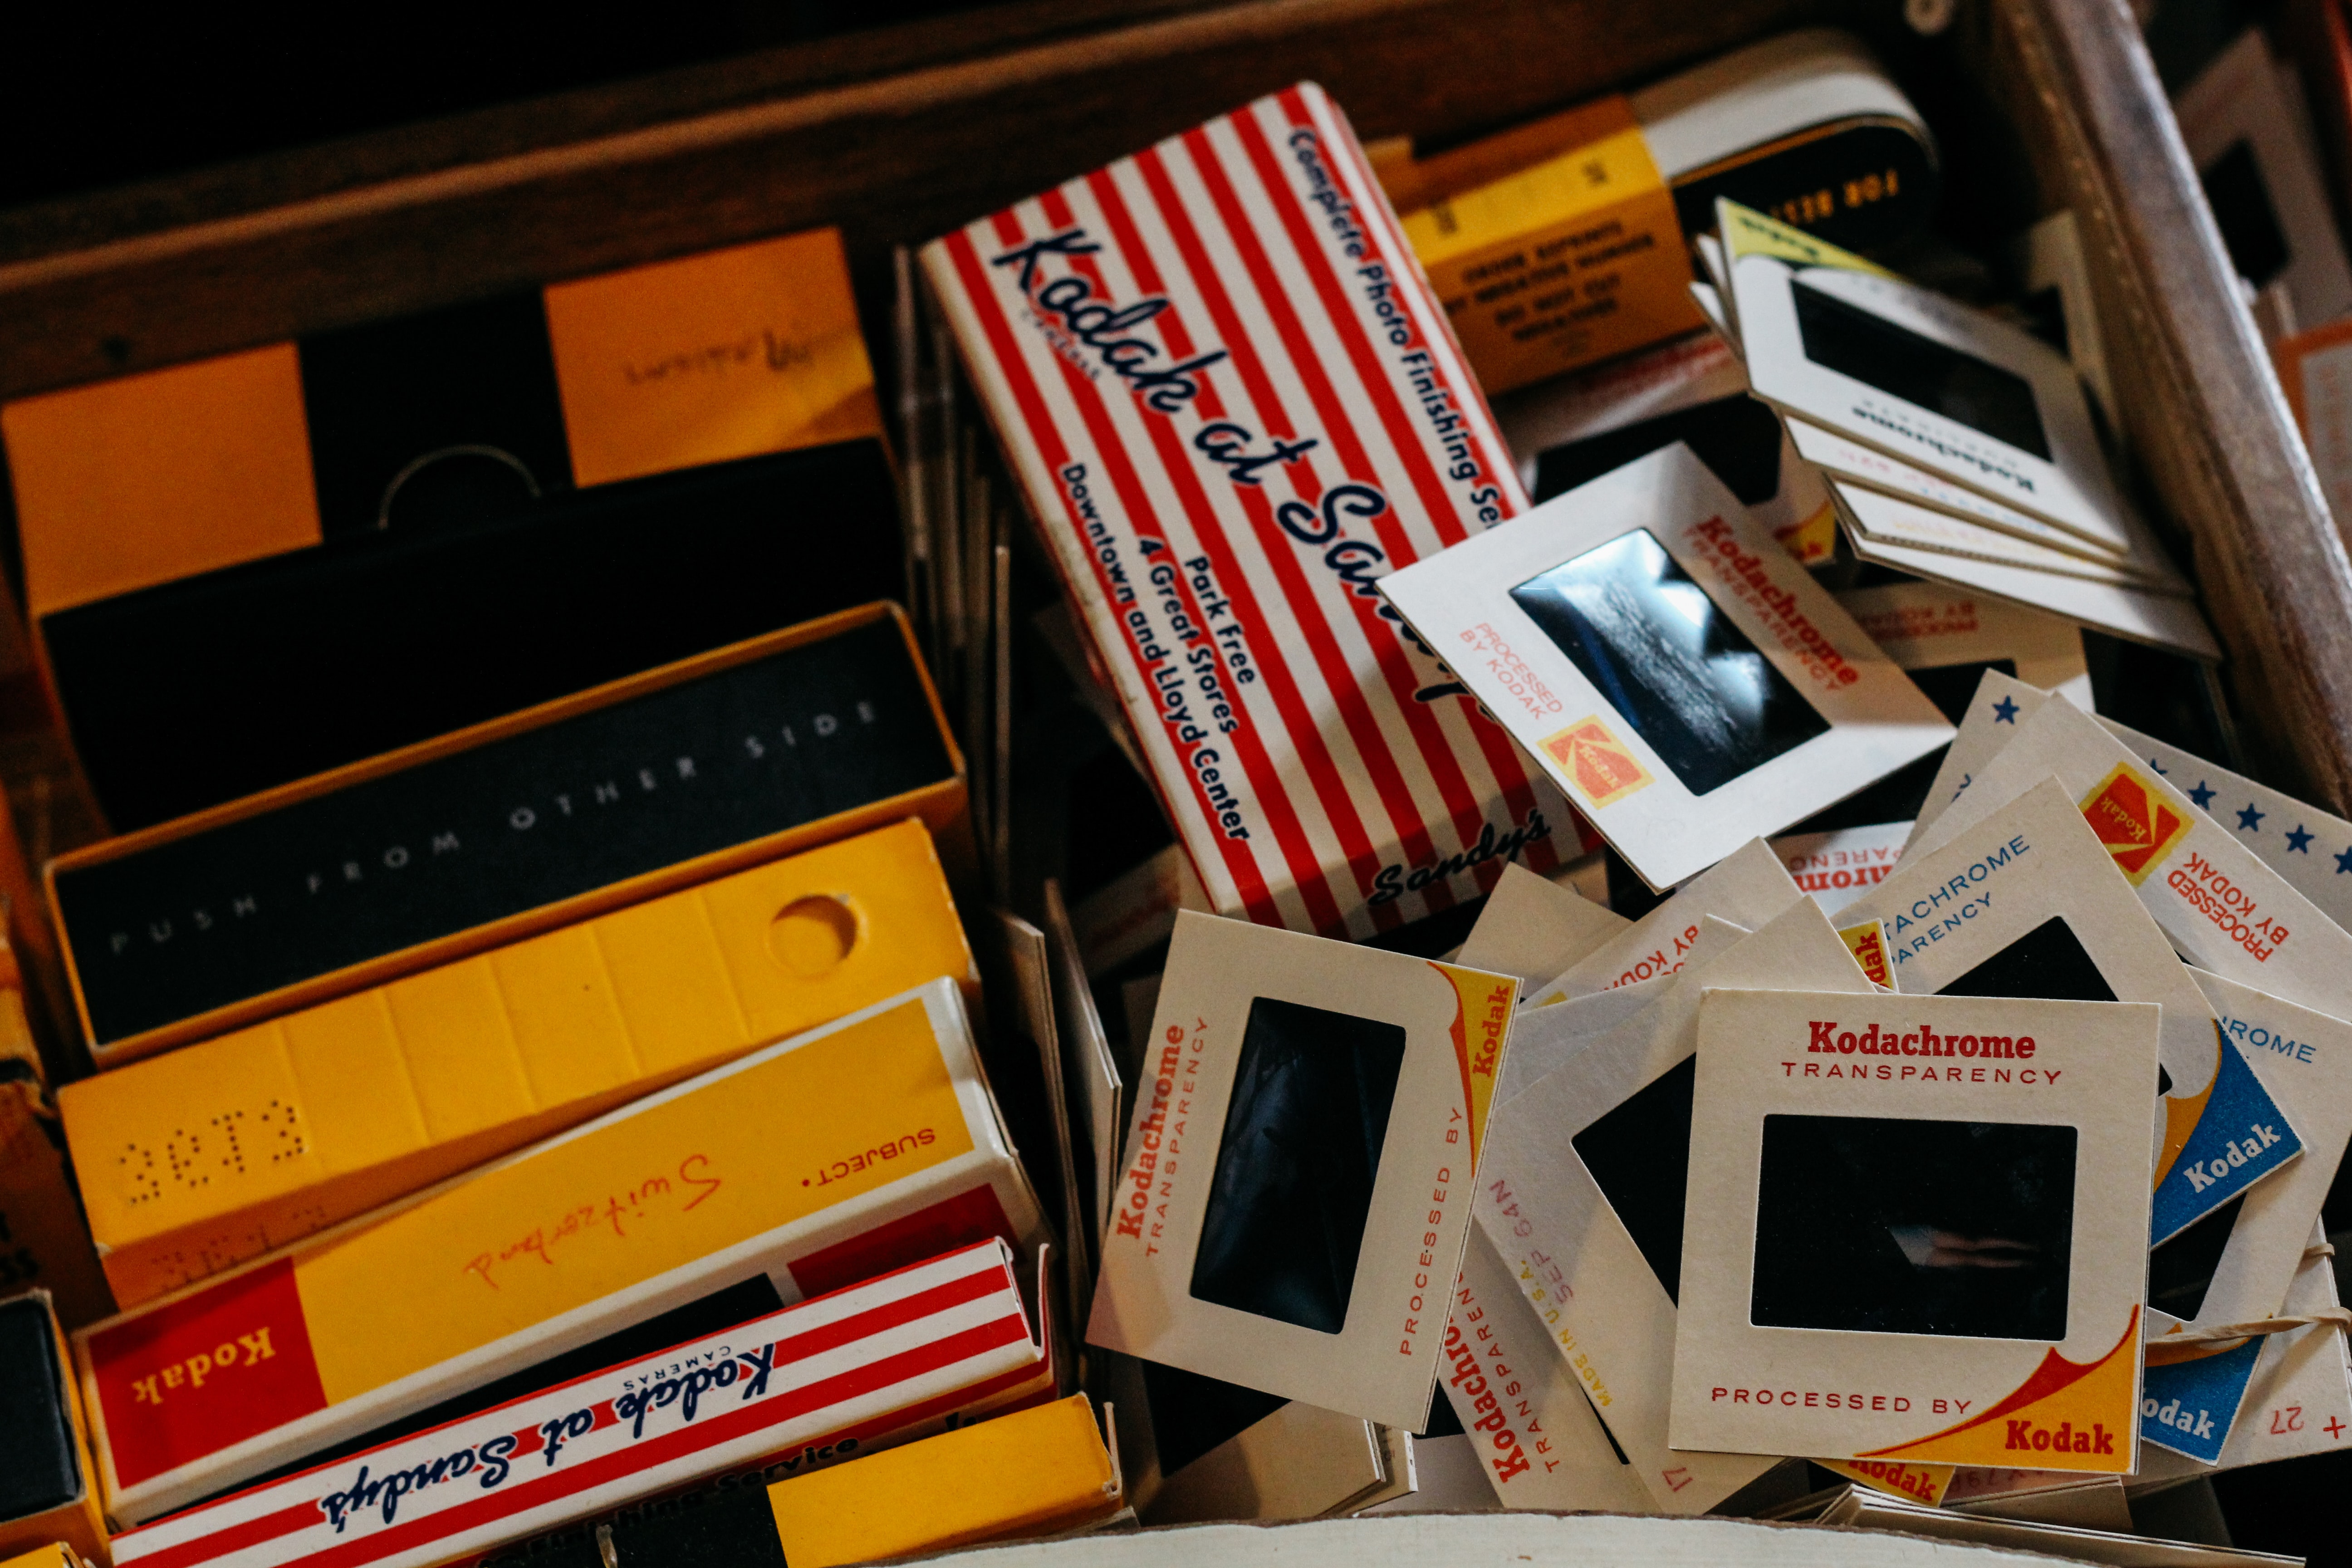 A collection of kodachrome slides